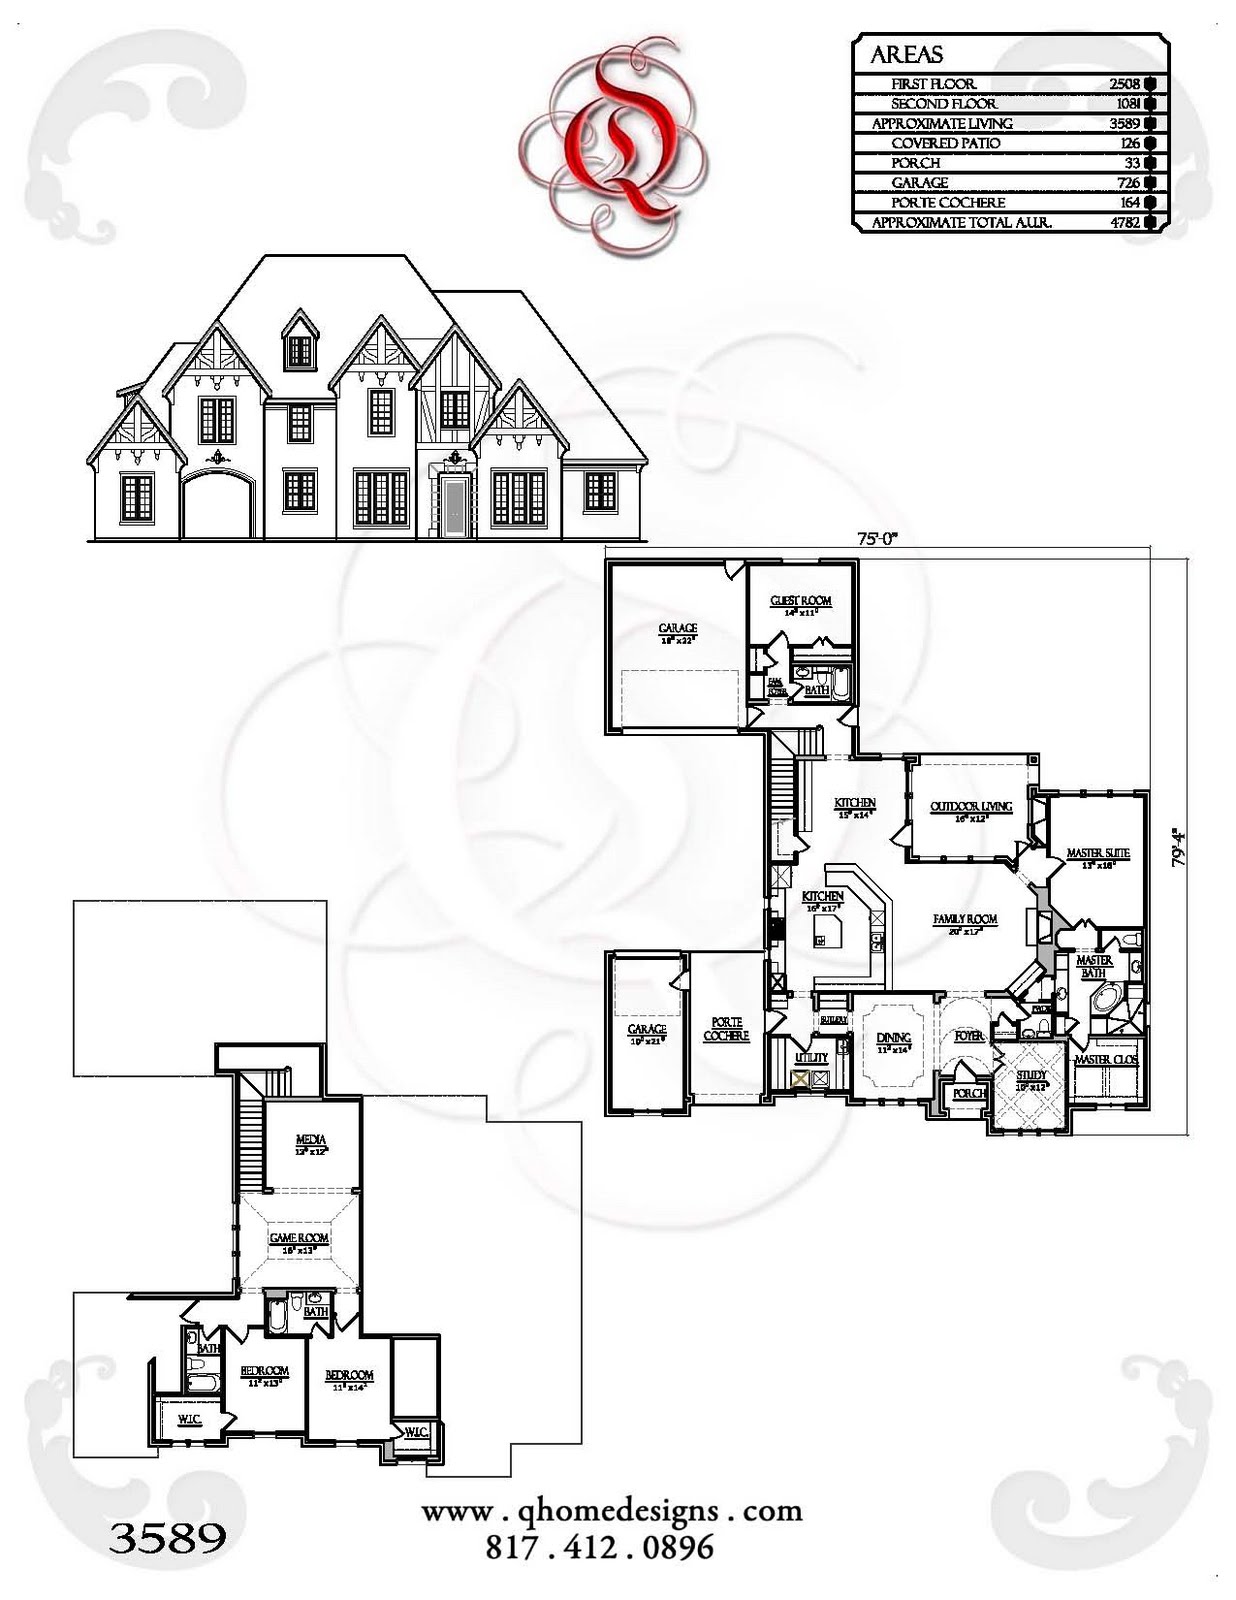 House Plans with Porte Cochere